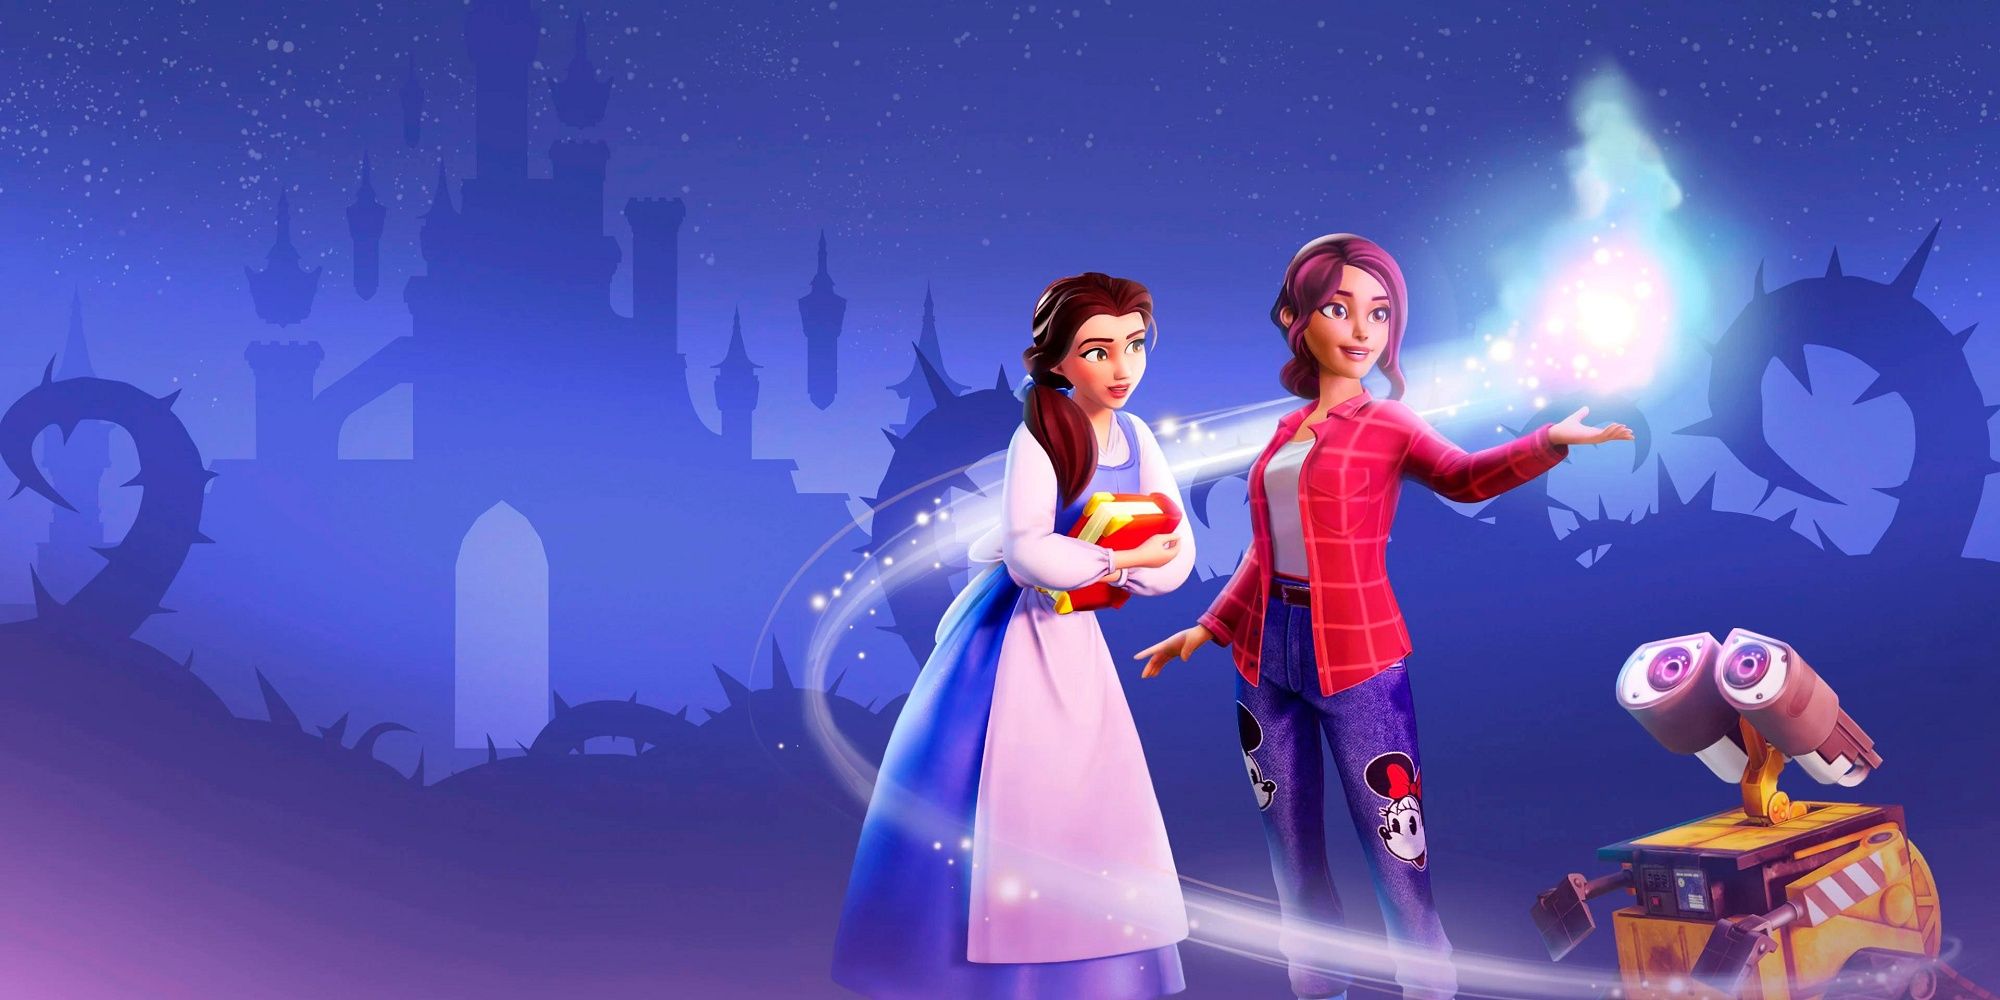 Disney Dreamlight Valley promotional art featuring Belle, the player, and Wall-E